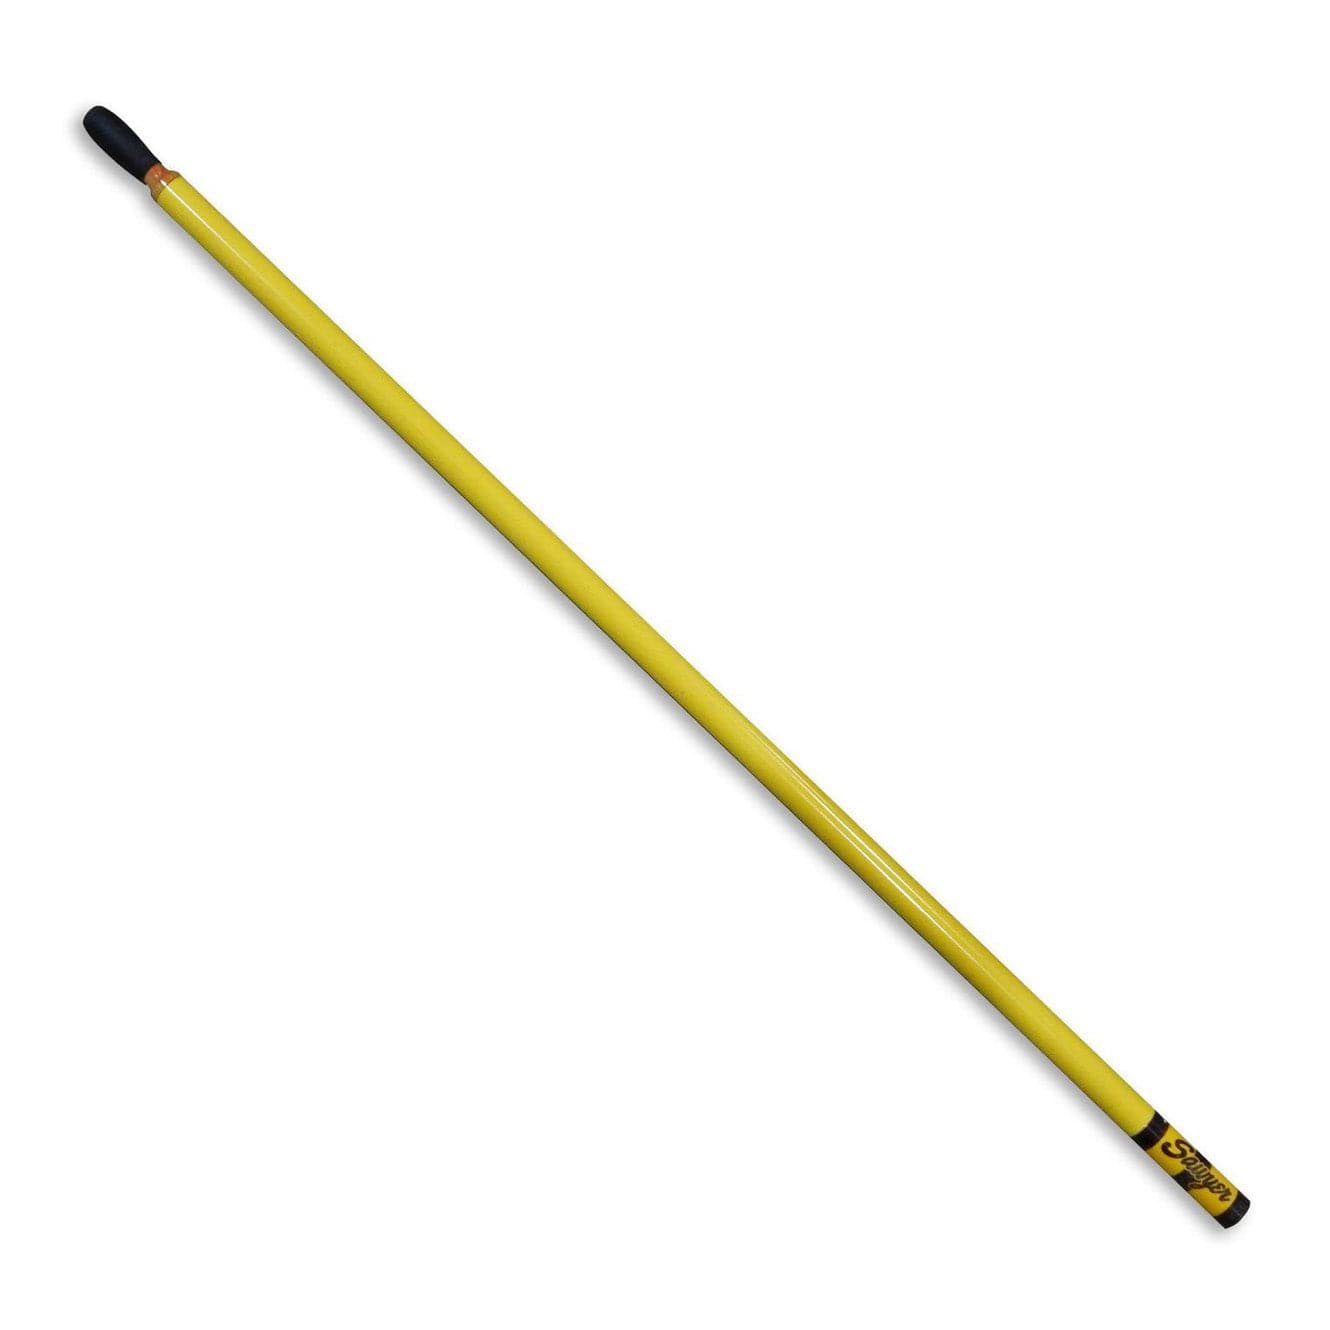 Featuring the Polecat Oar - Bare Shaft oar manufactured by Sawyer shown here from a third angle.